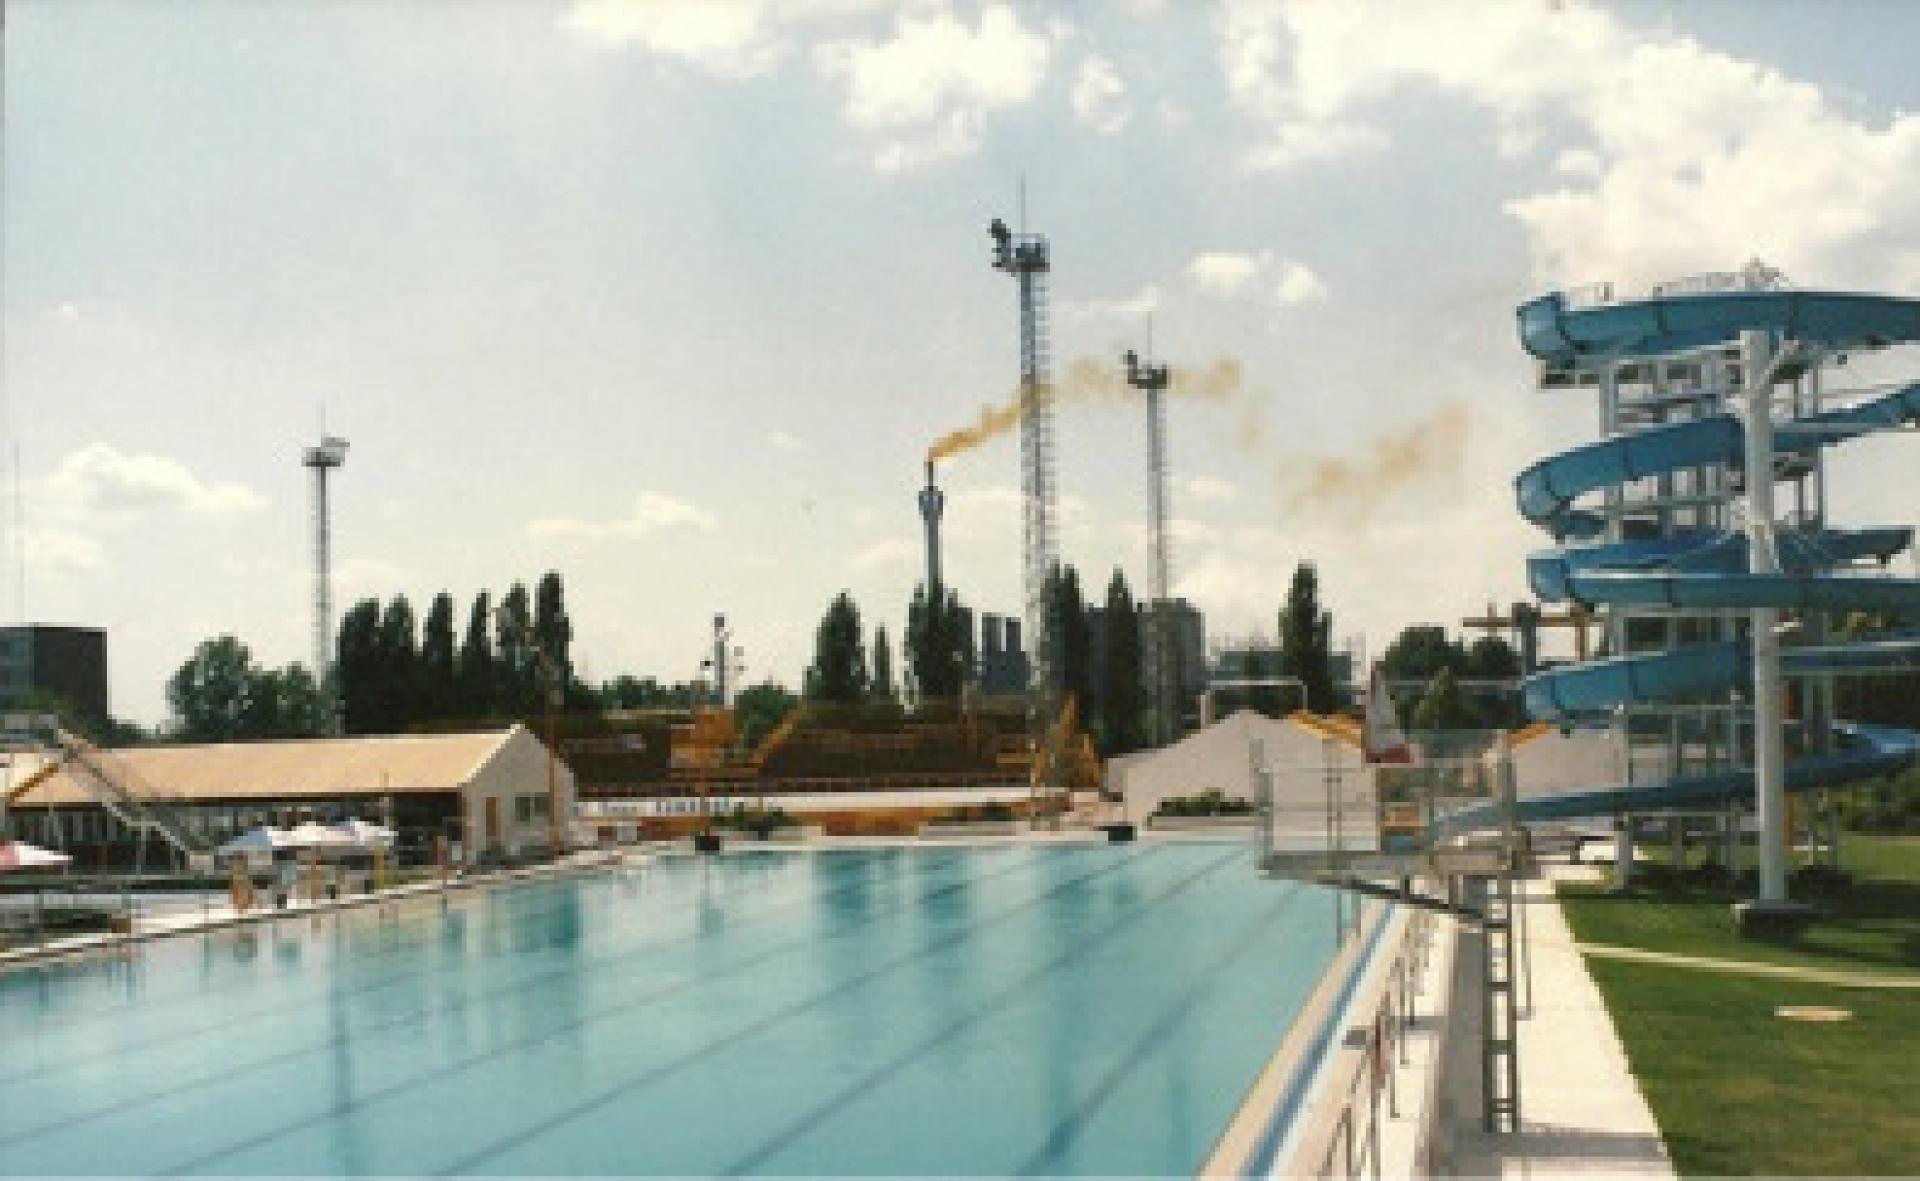 Outdoor swimming pool and skating rink next to the chemical factory | Source: Tiszaúváros Retro